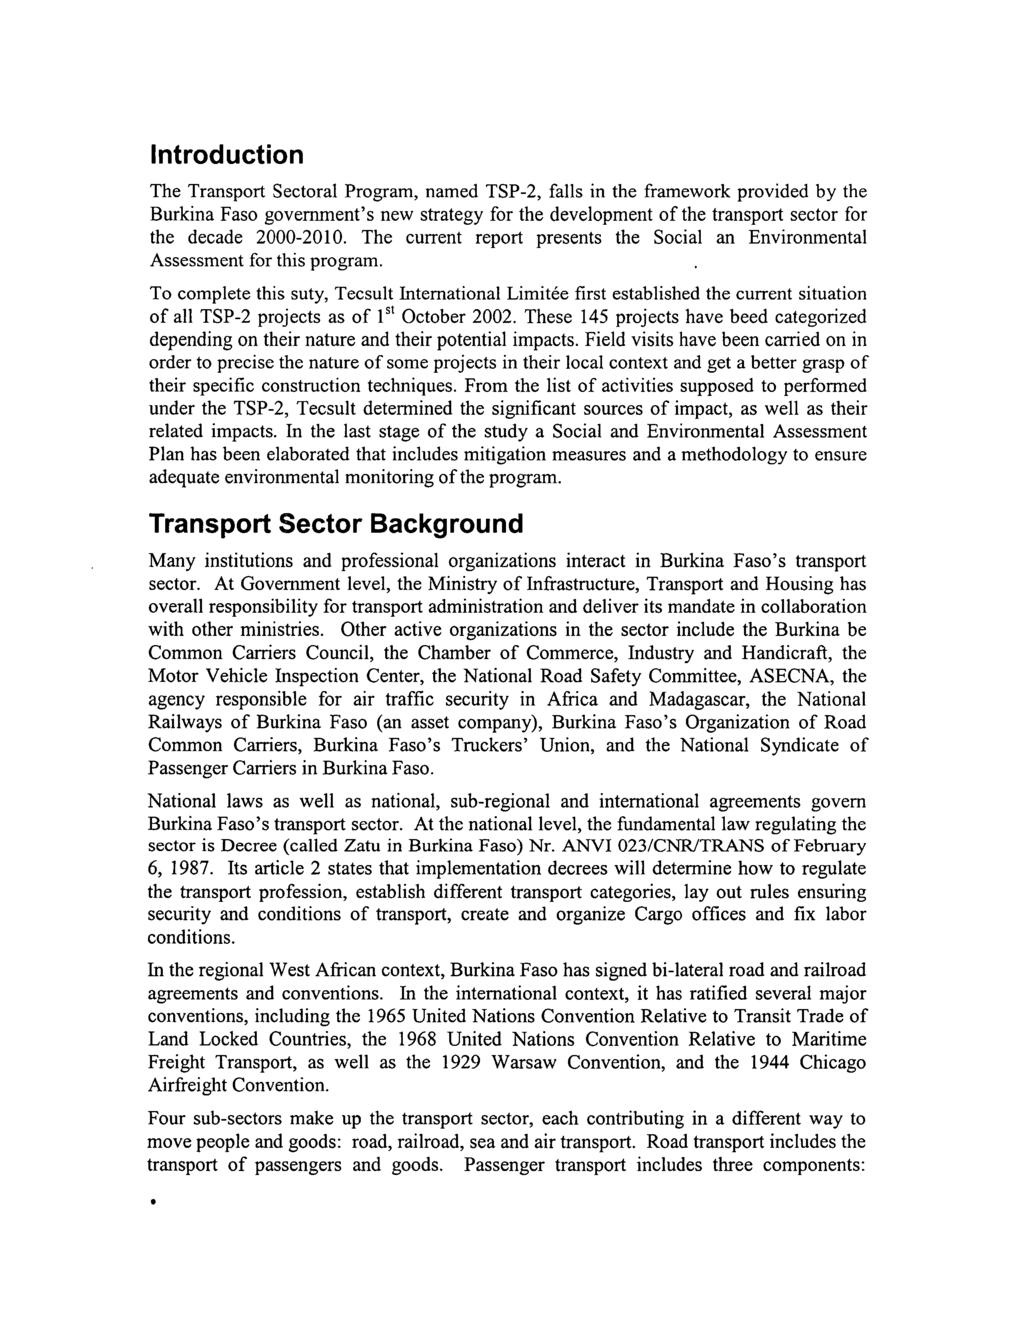 Introduction The Transport Sectoral Program, named TSP-2, falls in the framework provided by the Burkina Faso government's new strategy for the development of the transport sector for the decade